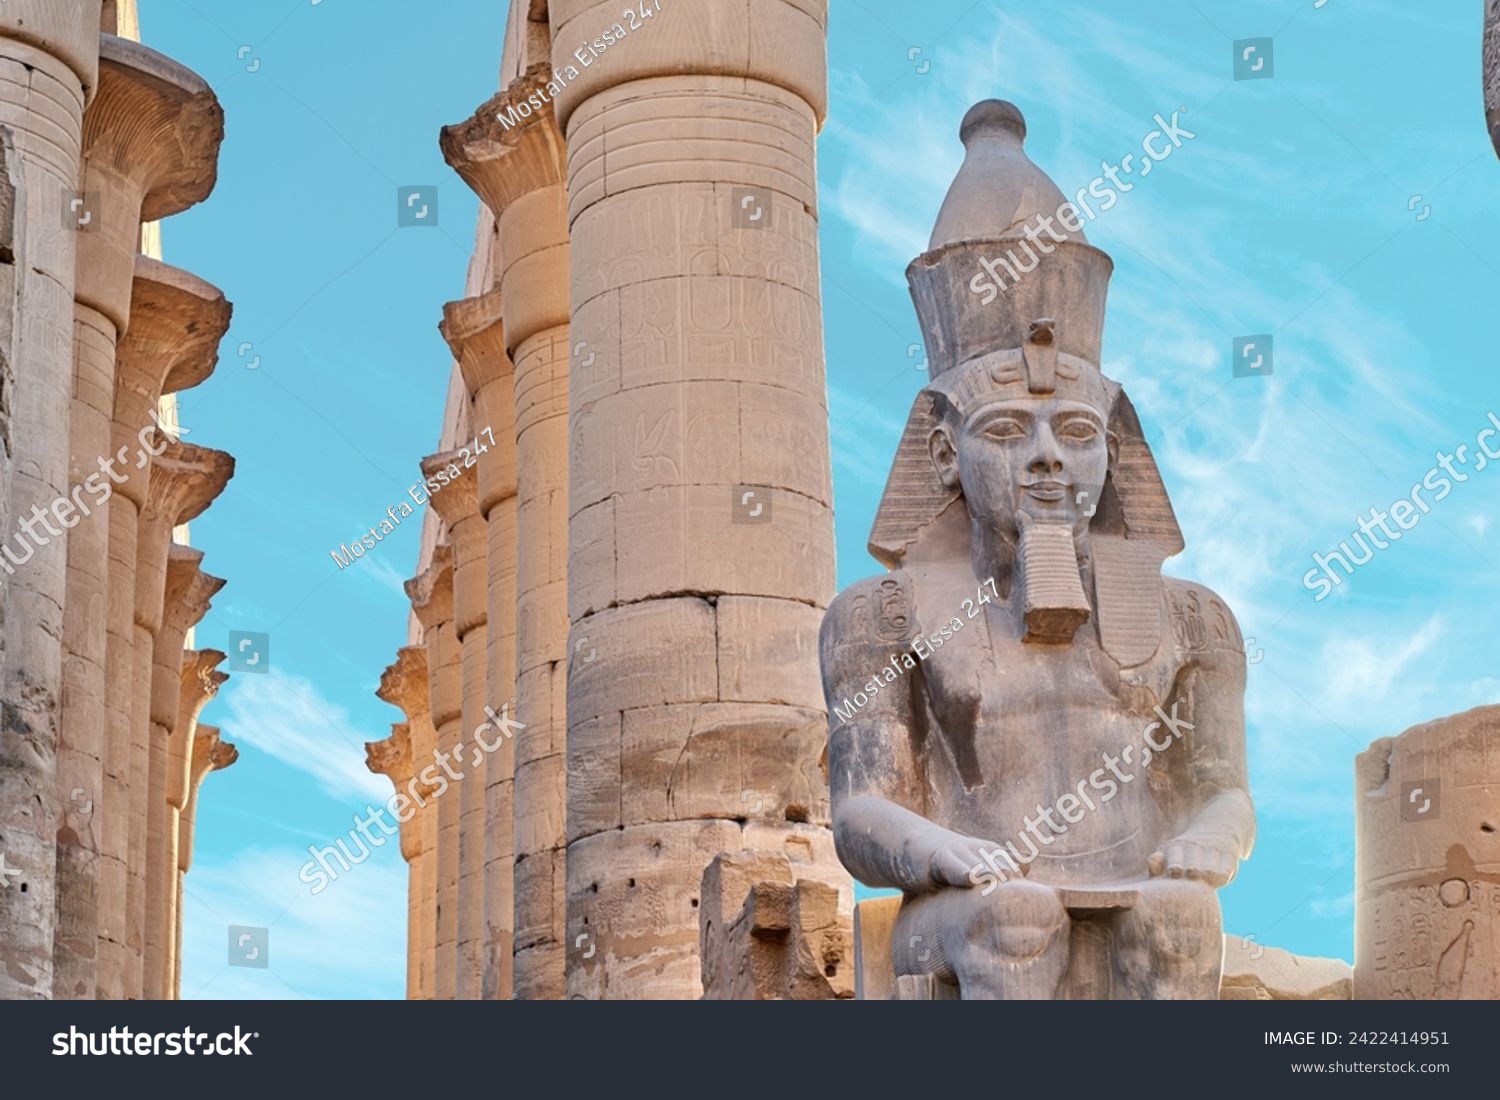 Seated statue of Ramesses II by the First pylon of the Luxor Temple, Egypt. Columns and statues of the Luxor temple main entrance, first pylon, Egypt #2422414951